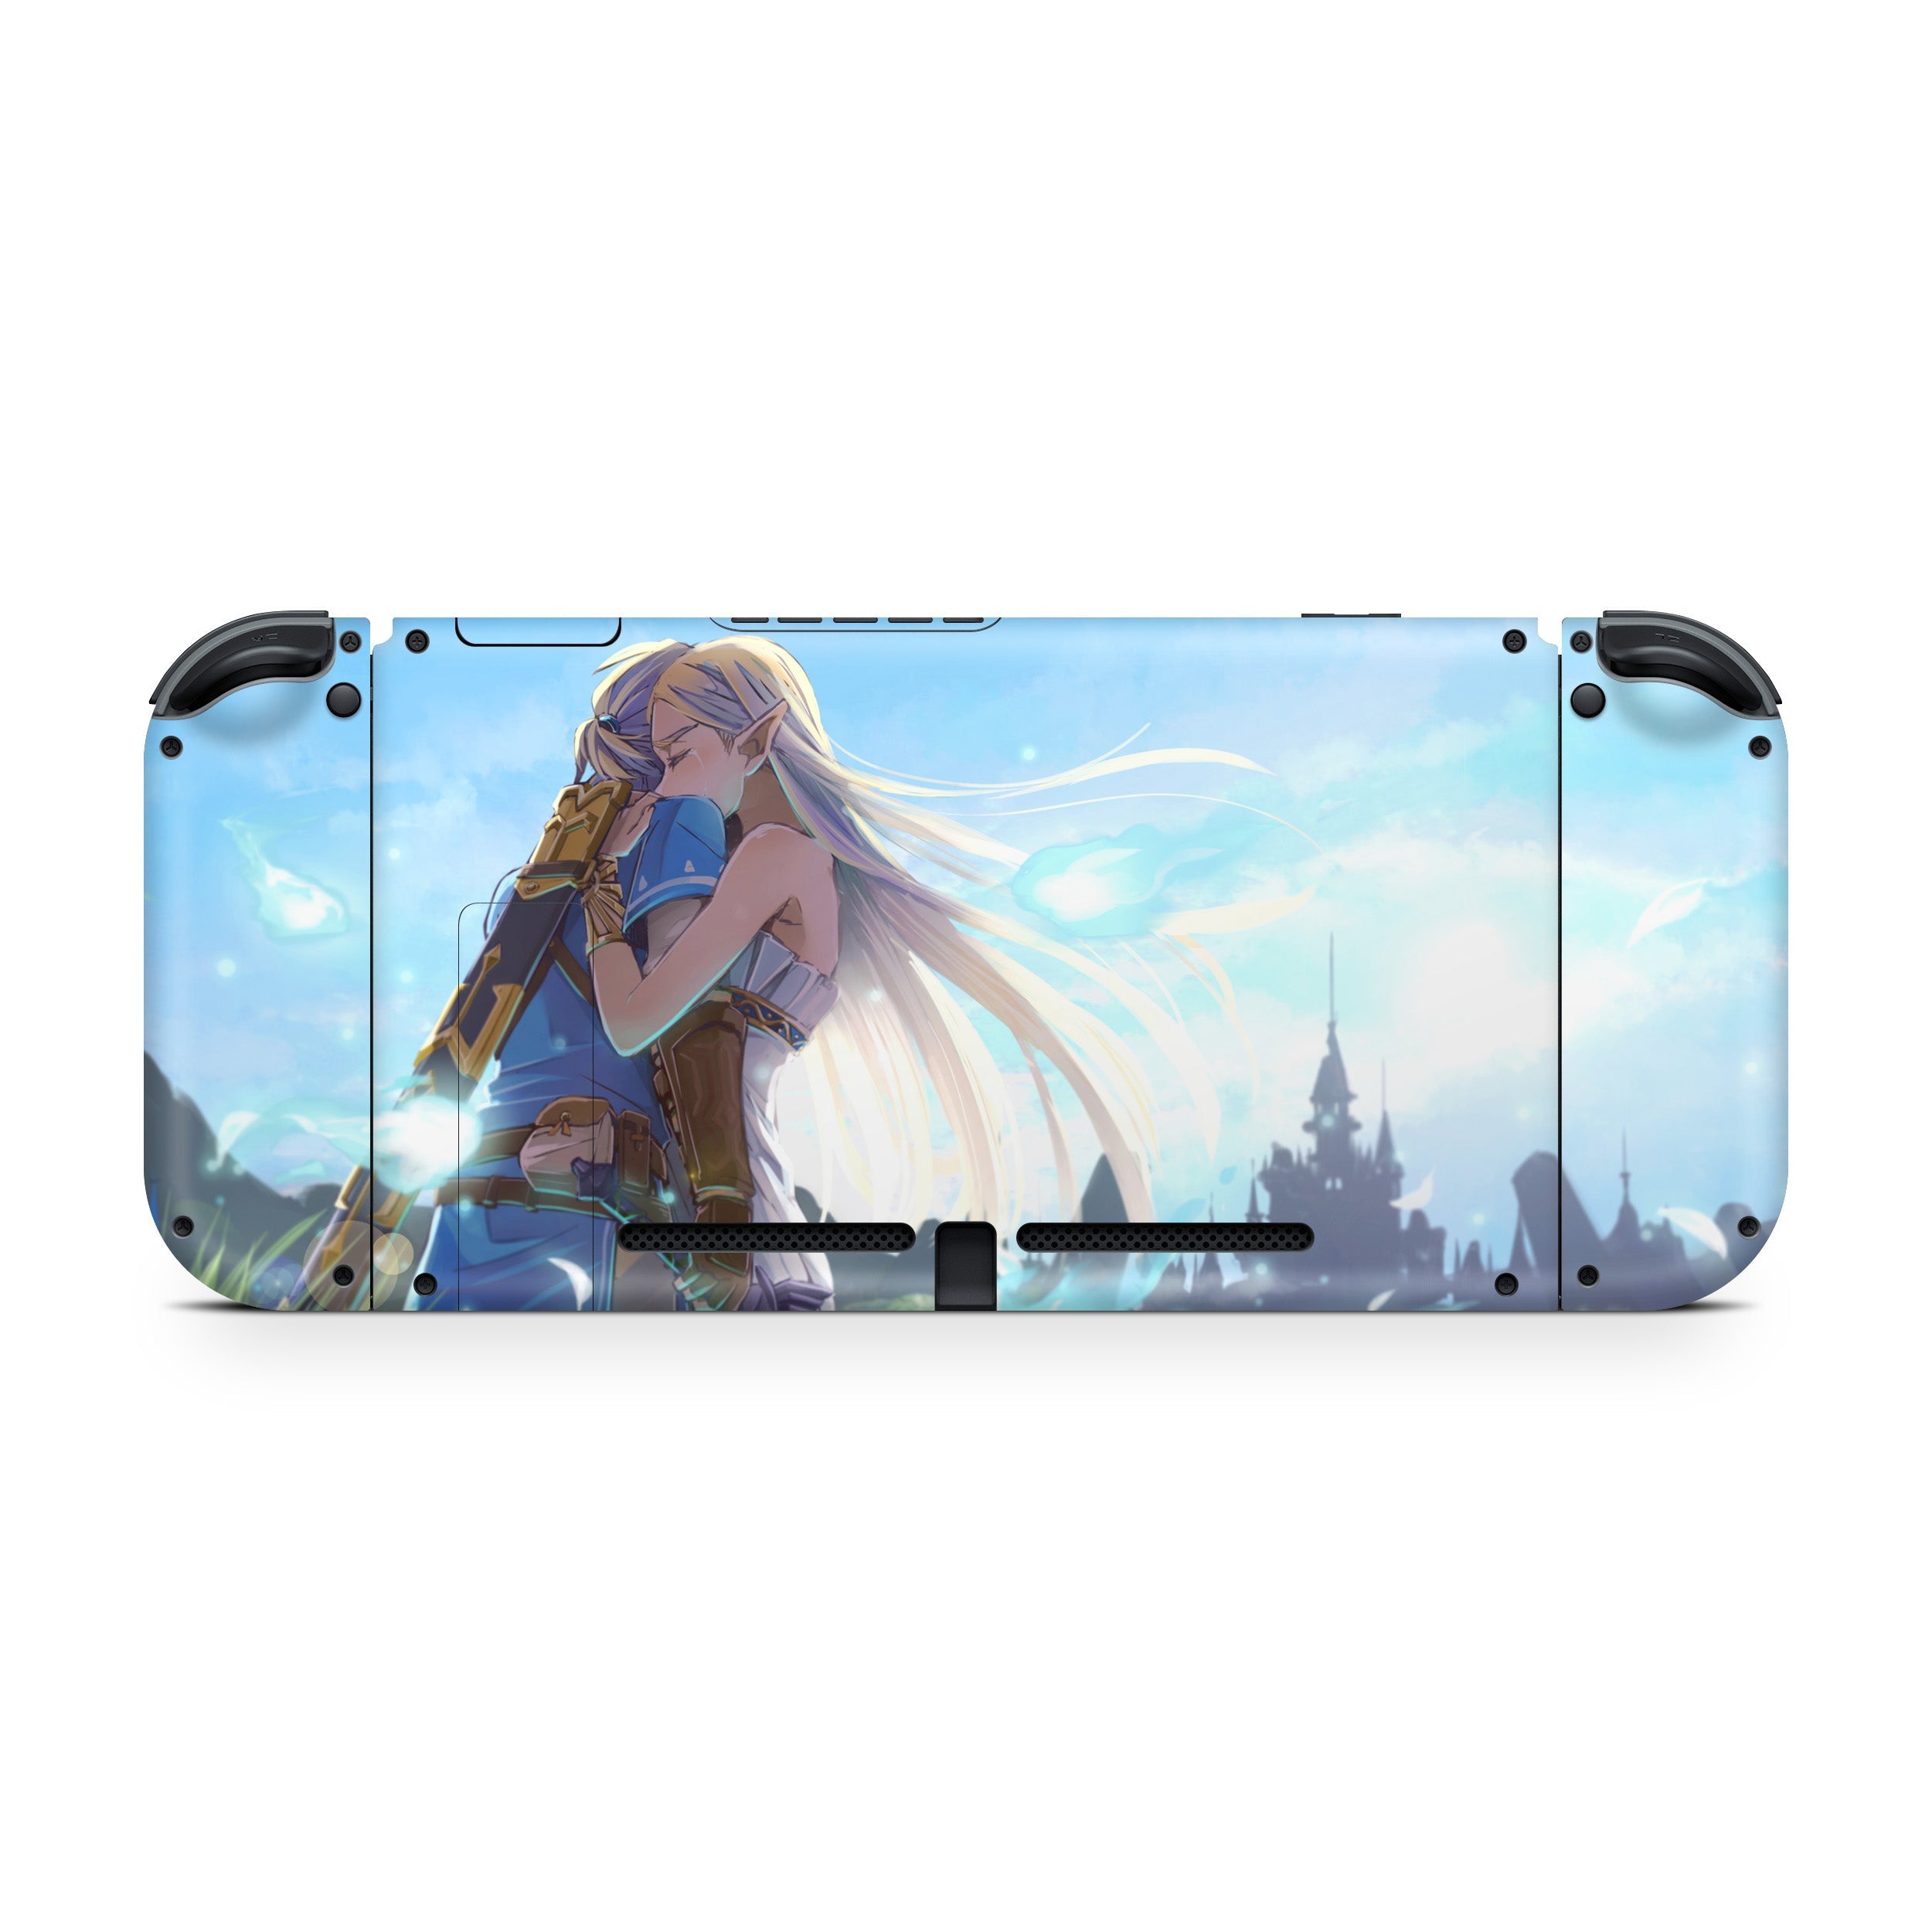 A video game skin featuring a Zelda design for the Nintendo Switch.